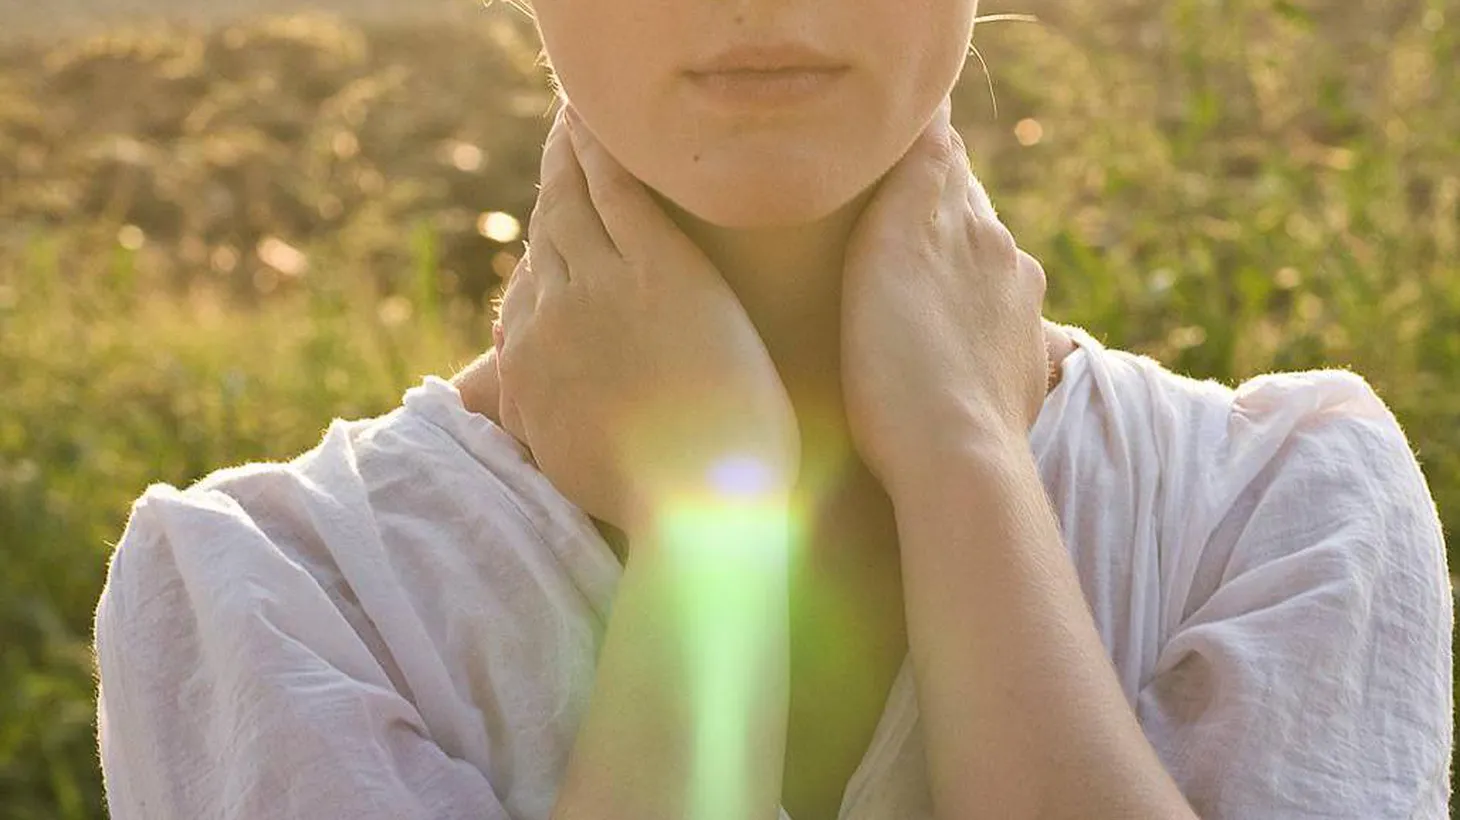 At just 20 years old, singer Laura Marling is already considered the high priestess of a new brand of pop folk in her native UK. We'll hear her storytelling love songs from recent album, I Speak Because I Can, when she performs on Morning Becomes Eclectic at 11:15am.